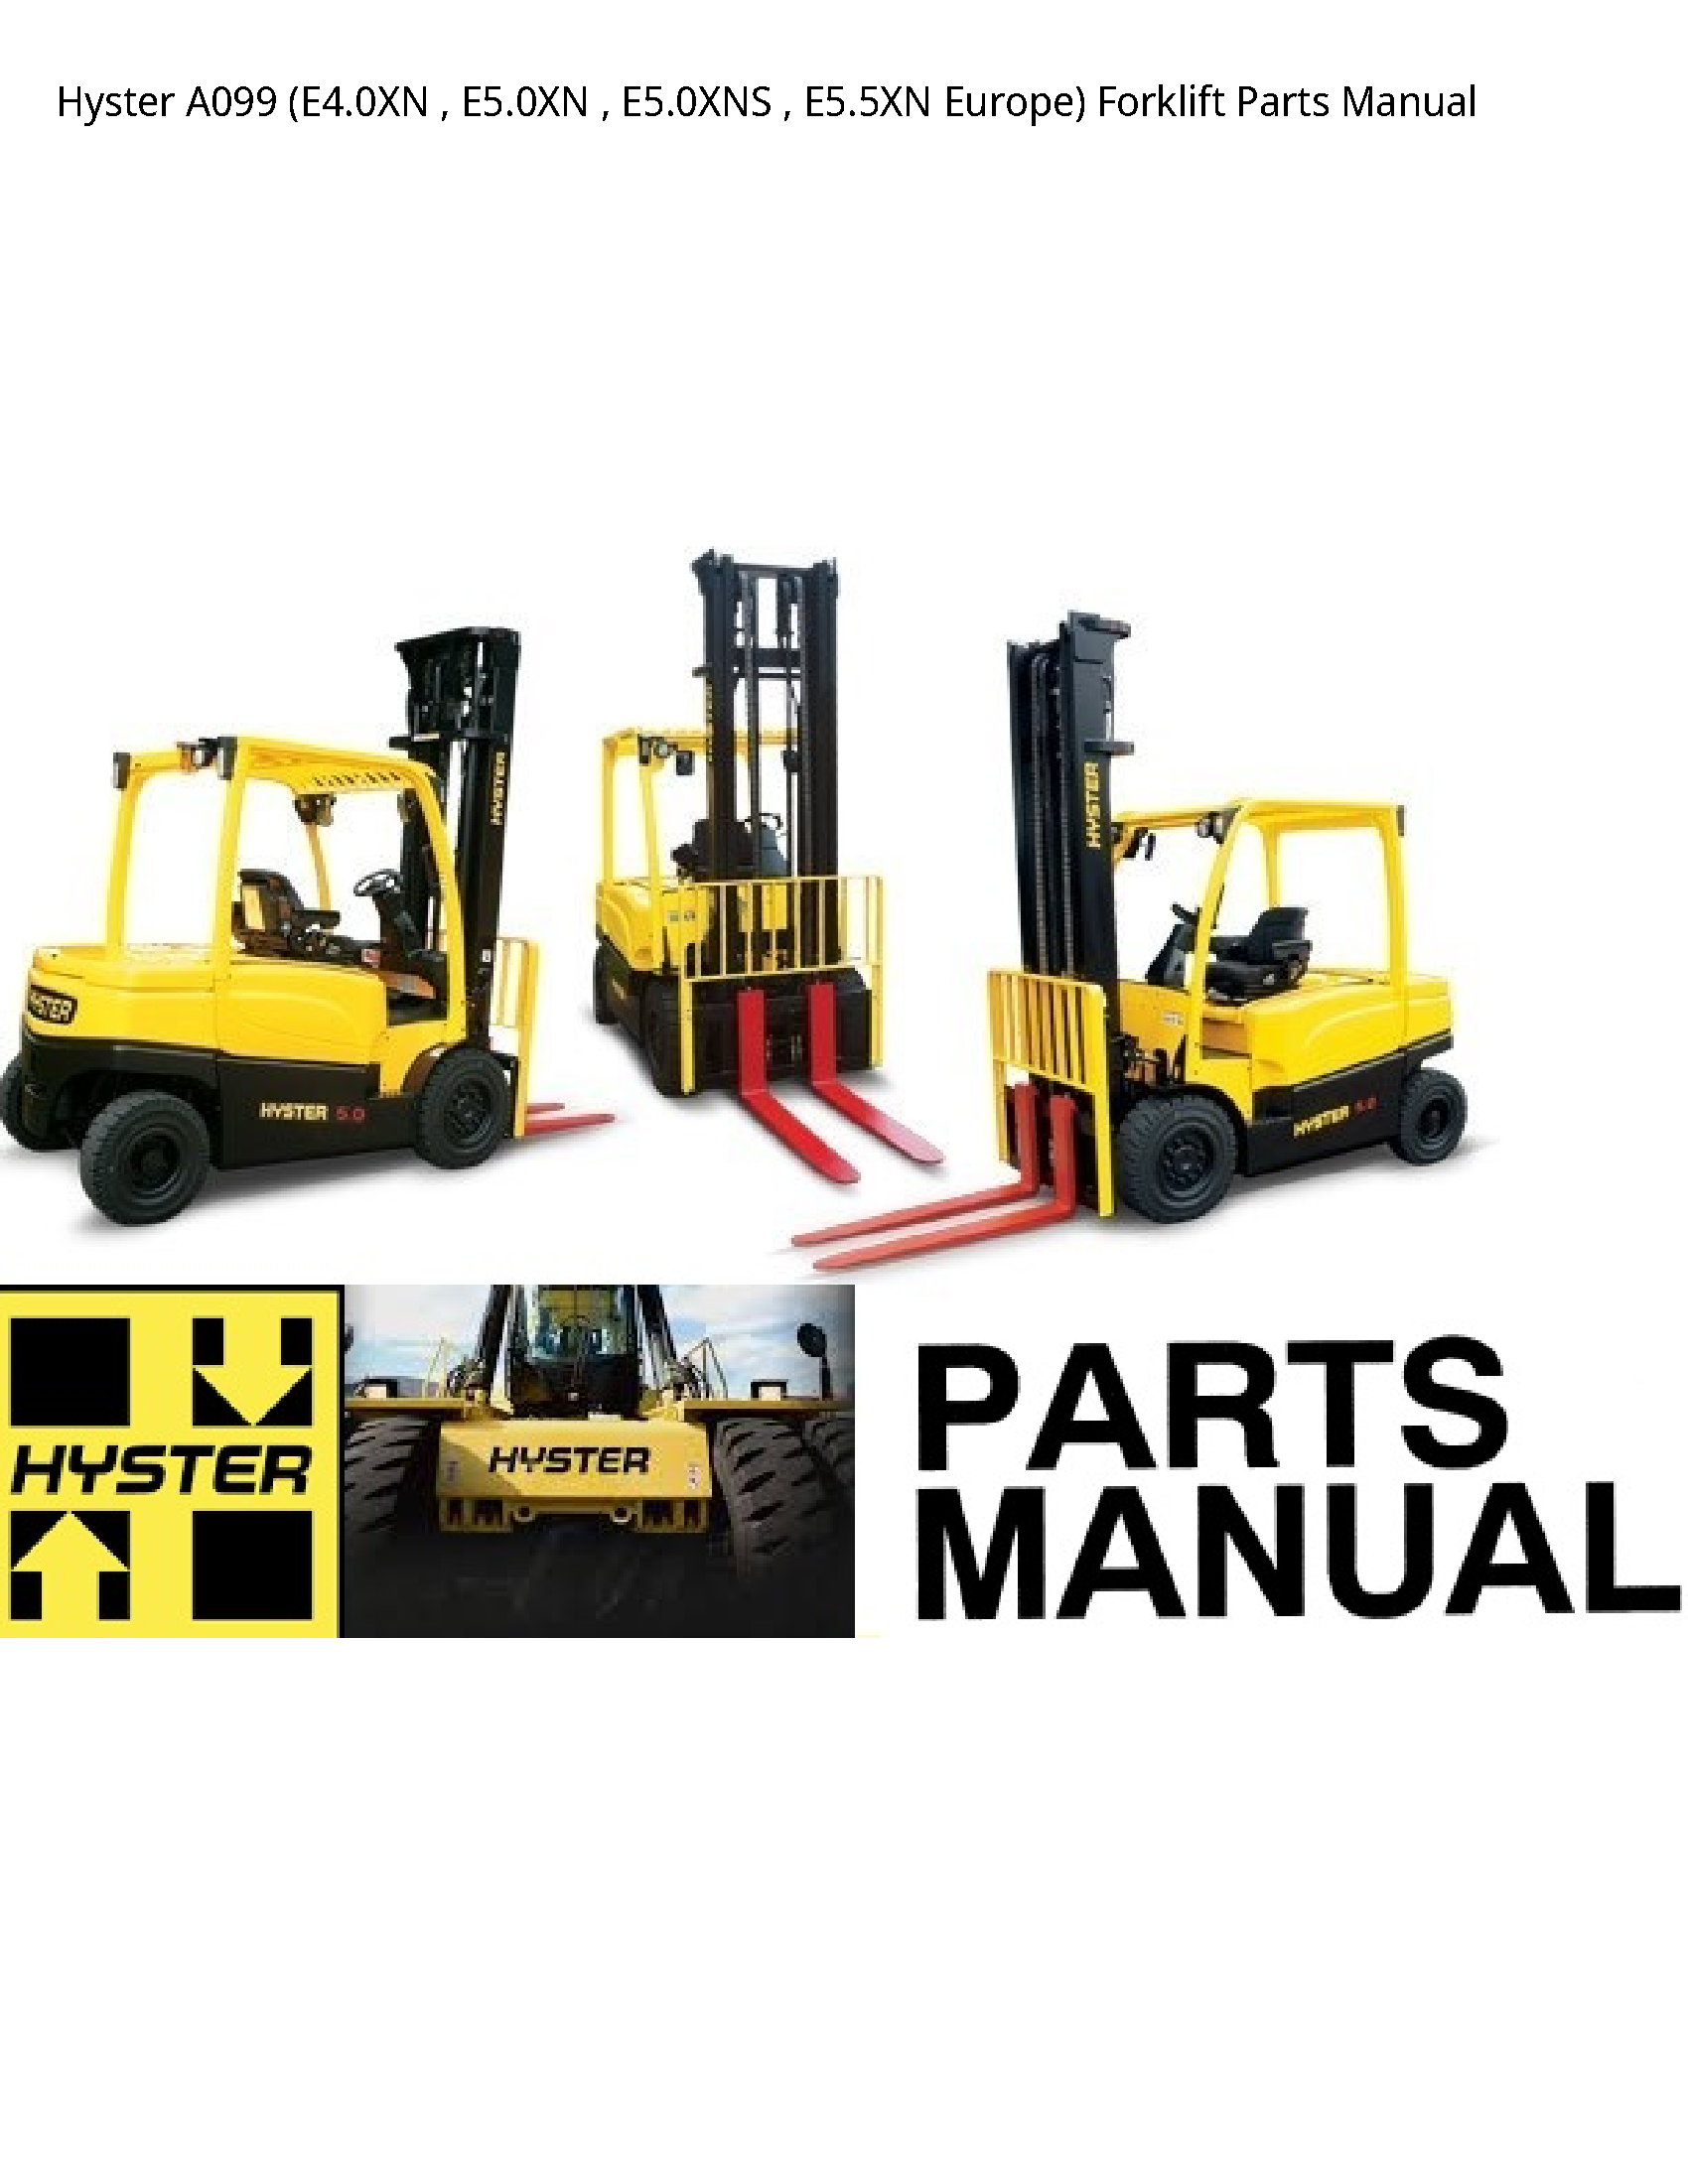 Hyster A099 Europe) Forklift Parts manual